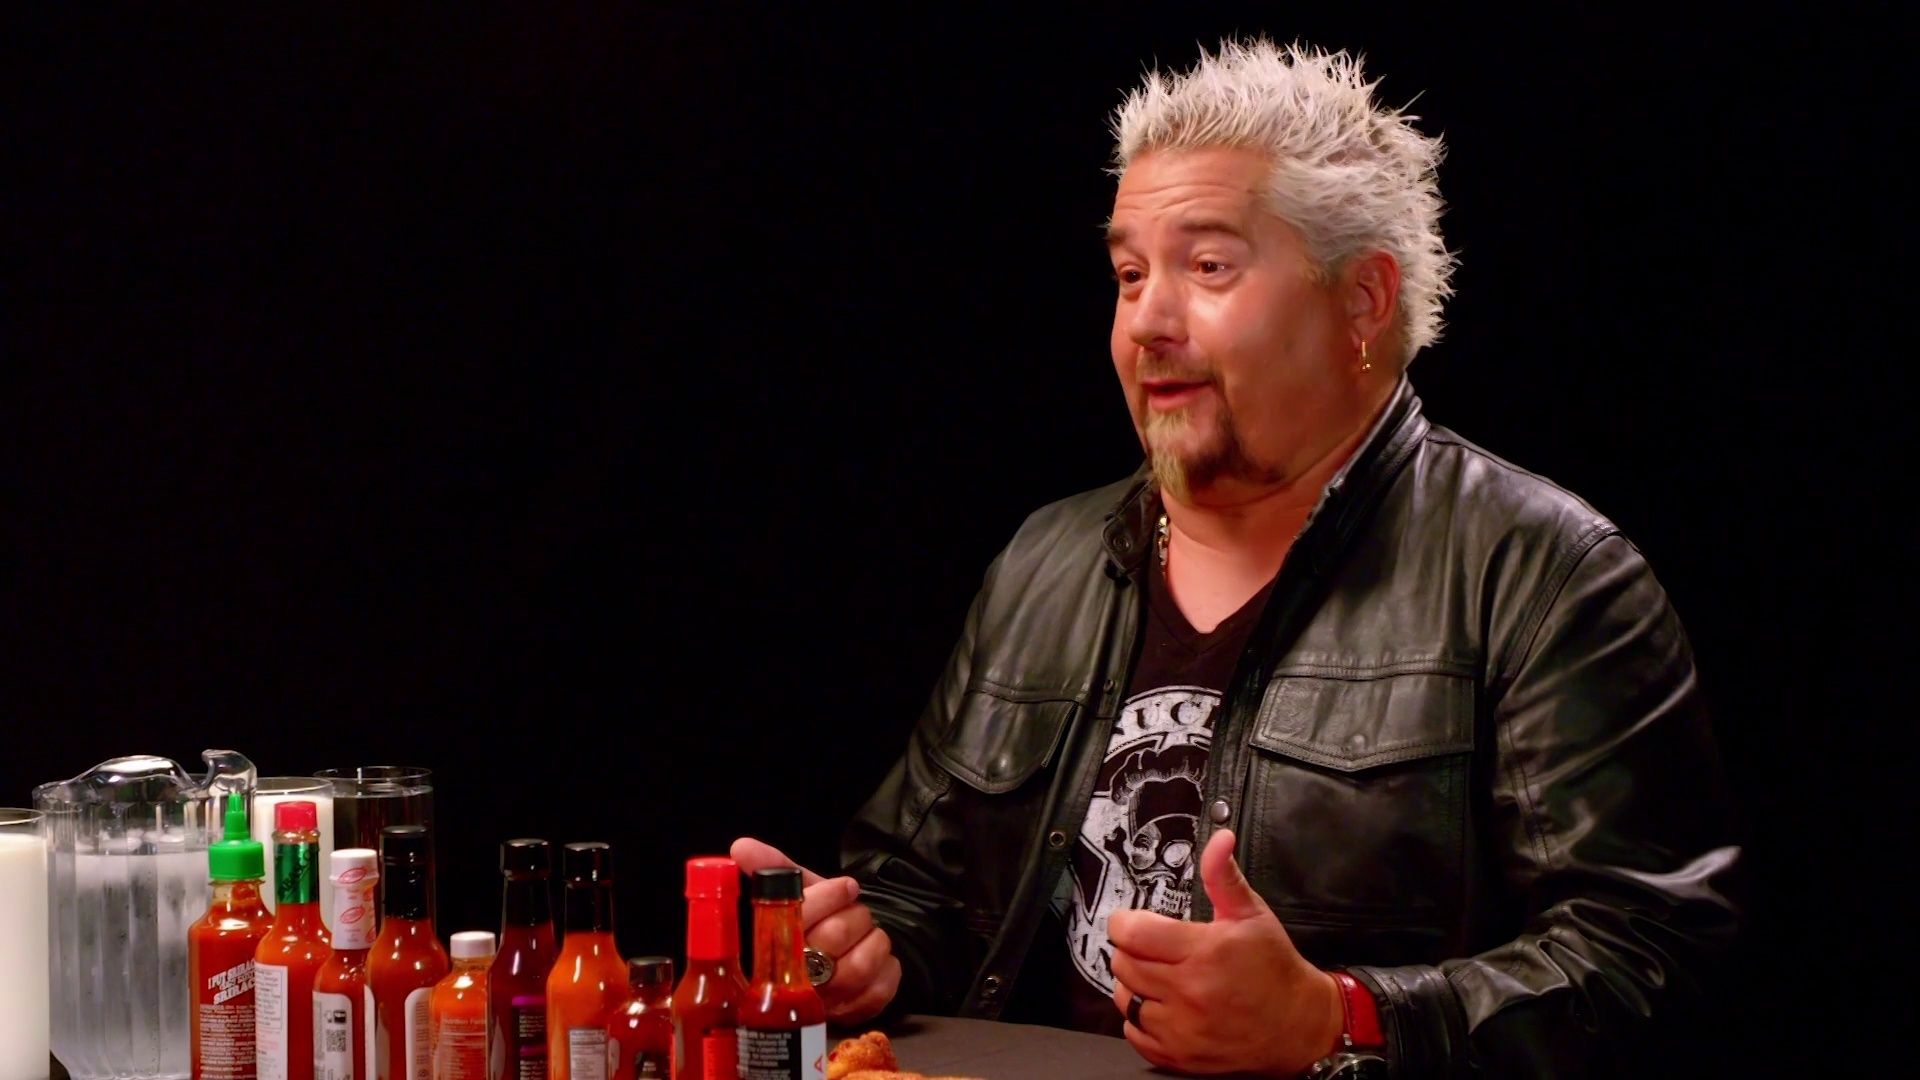 Guy Fieri Becomes the Mayor of Spicy Wings